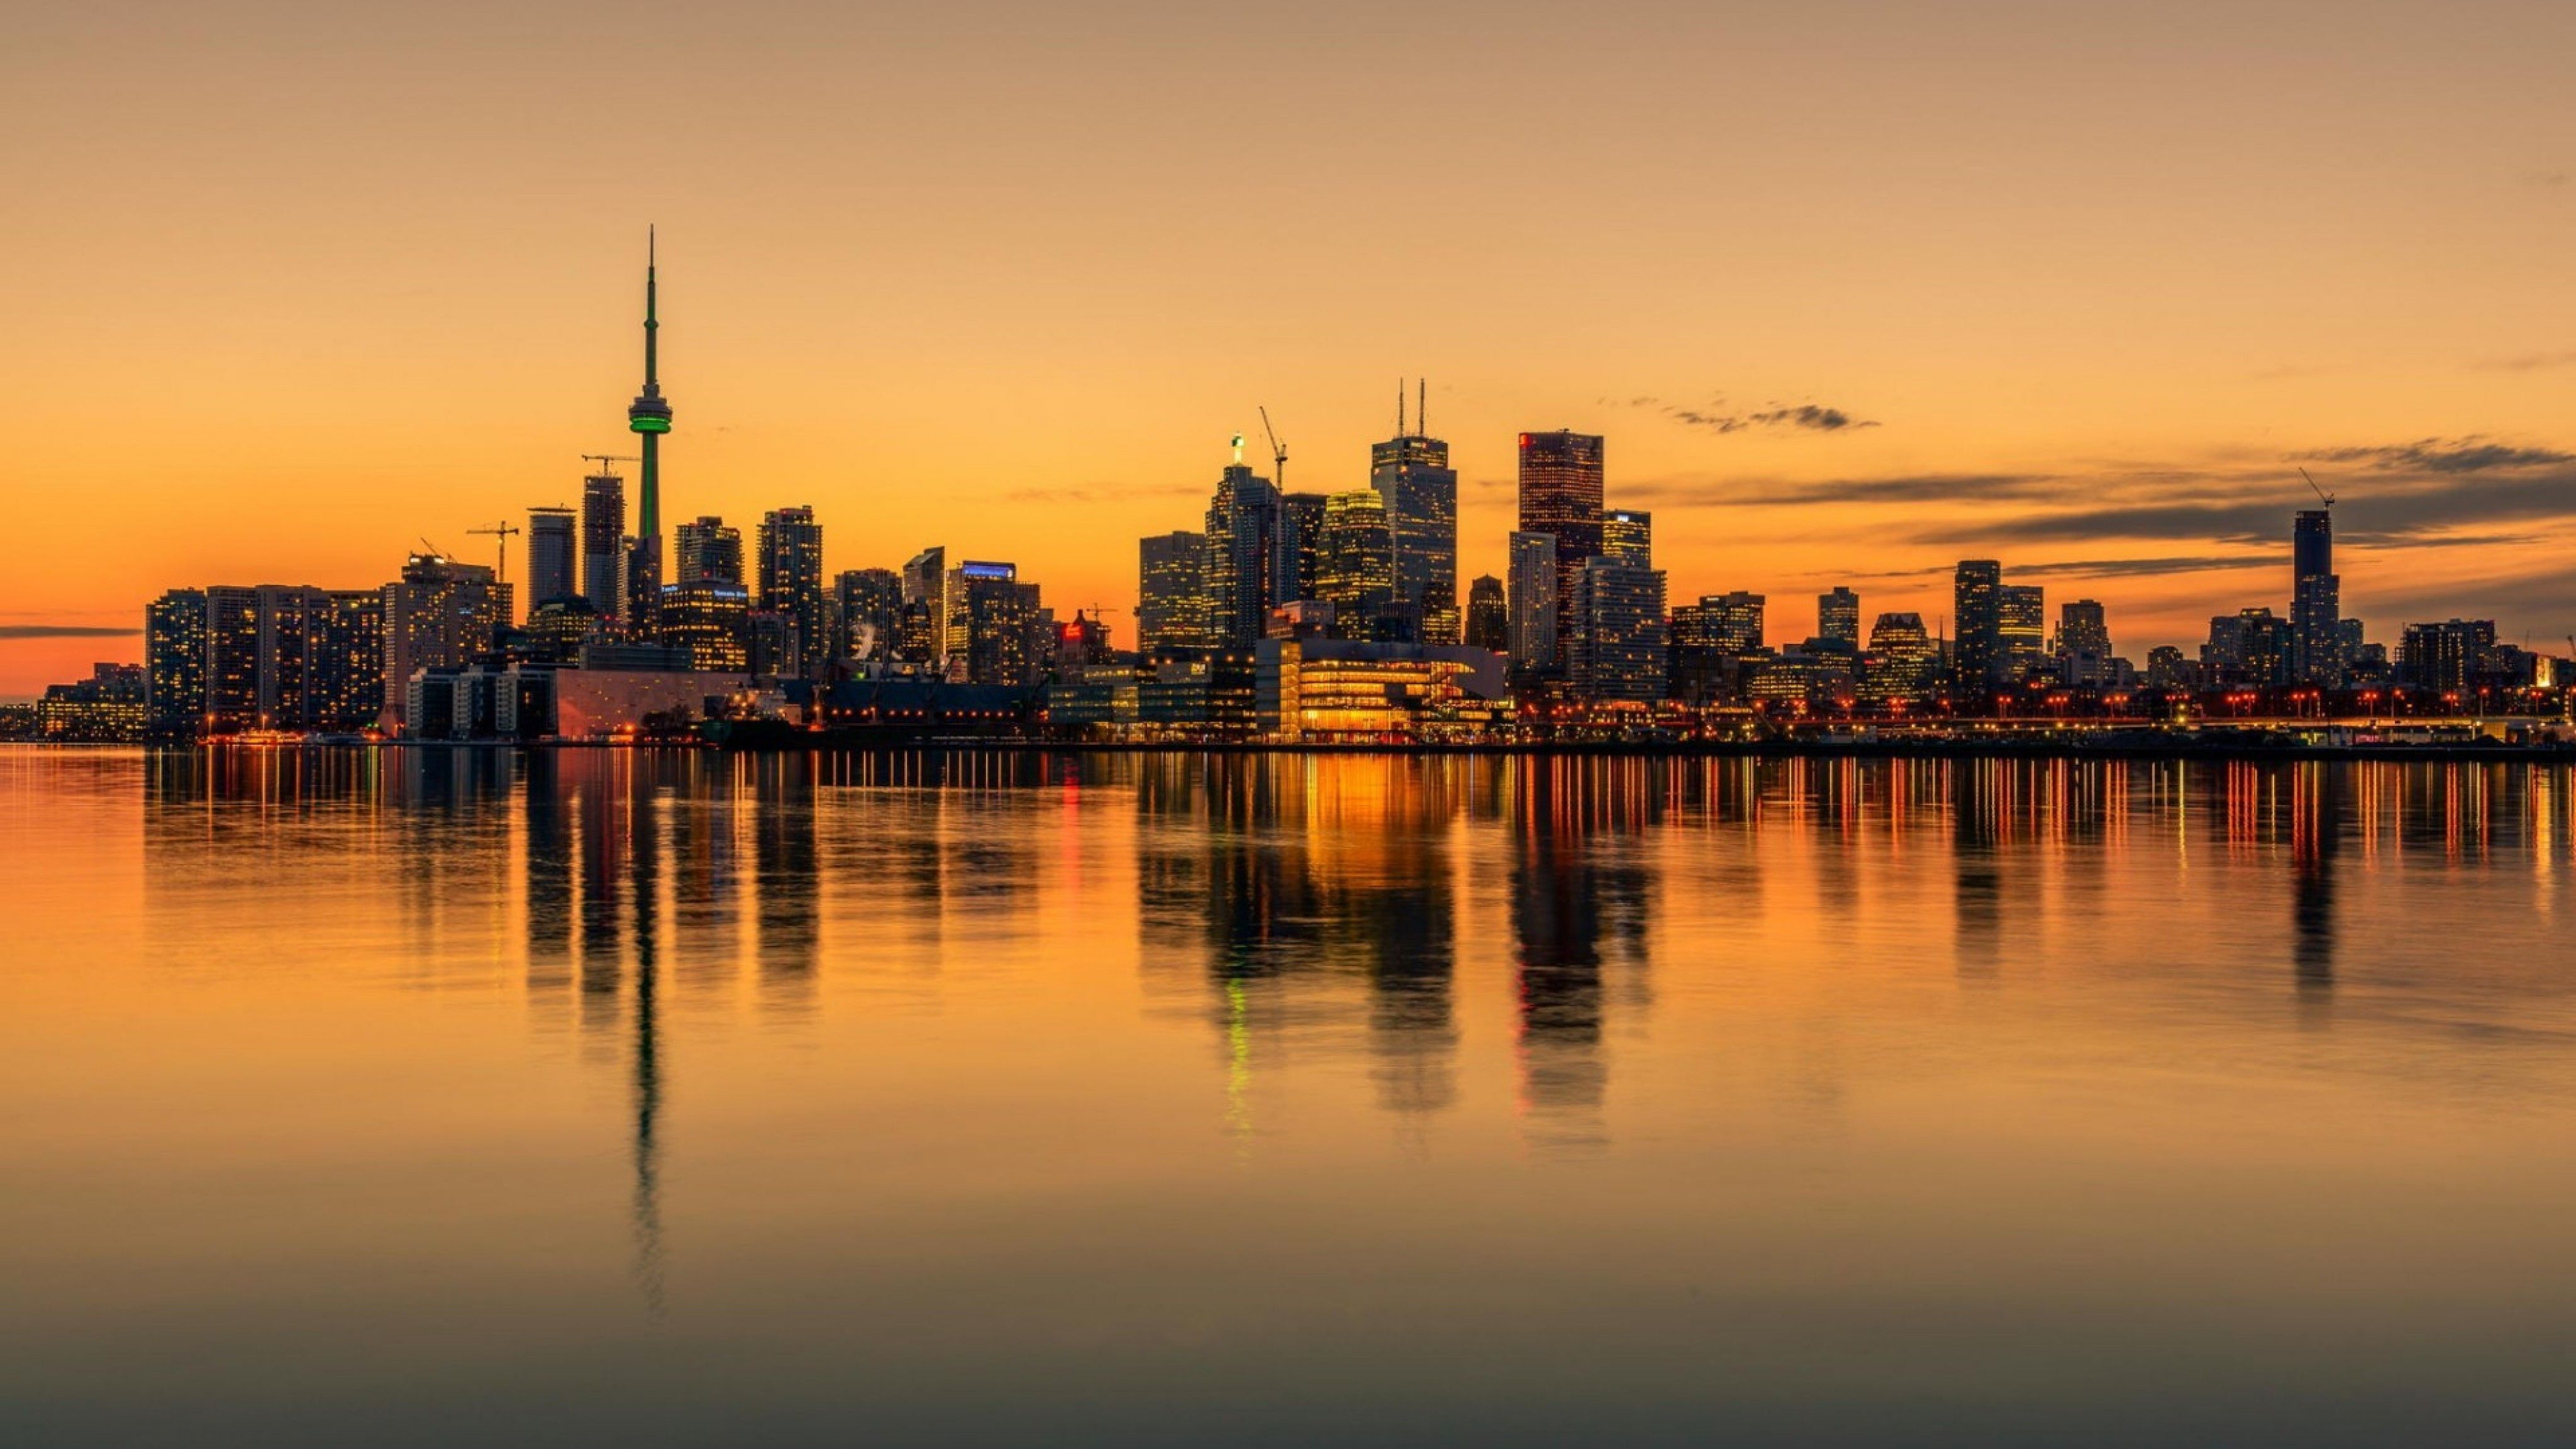 Download wallpapers Toronto, CN Tower, metropolis, skyscrapers, evening,  city lights, Canada for desktop free. Pictures for desktop free | Cn tower,  City, City wallpaper